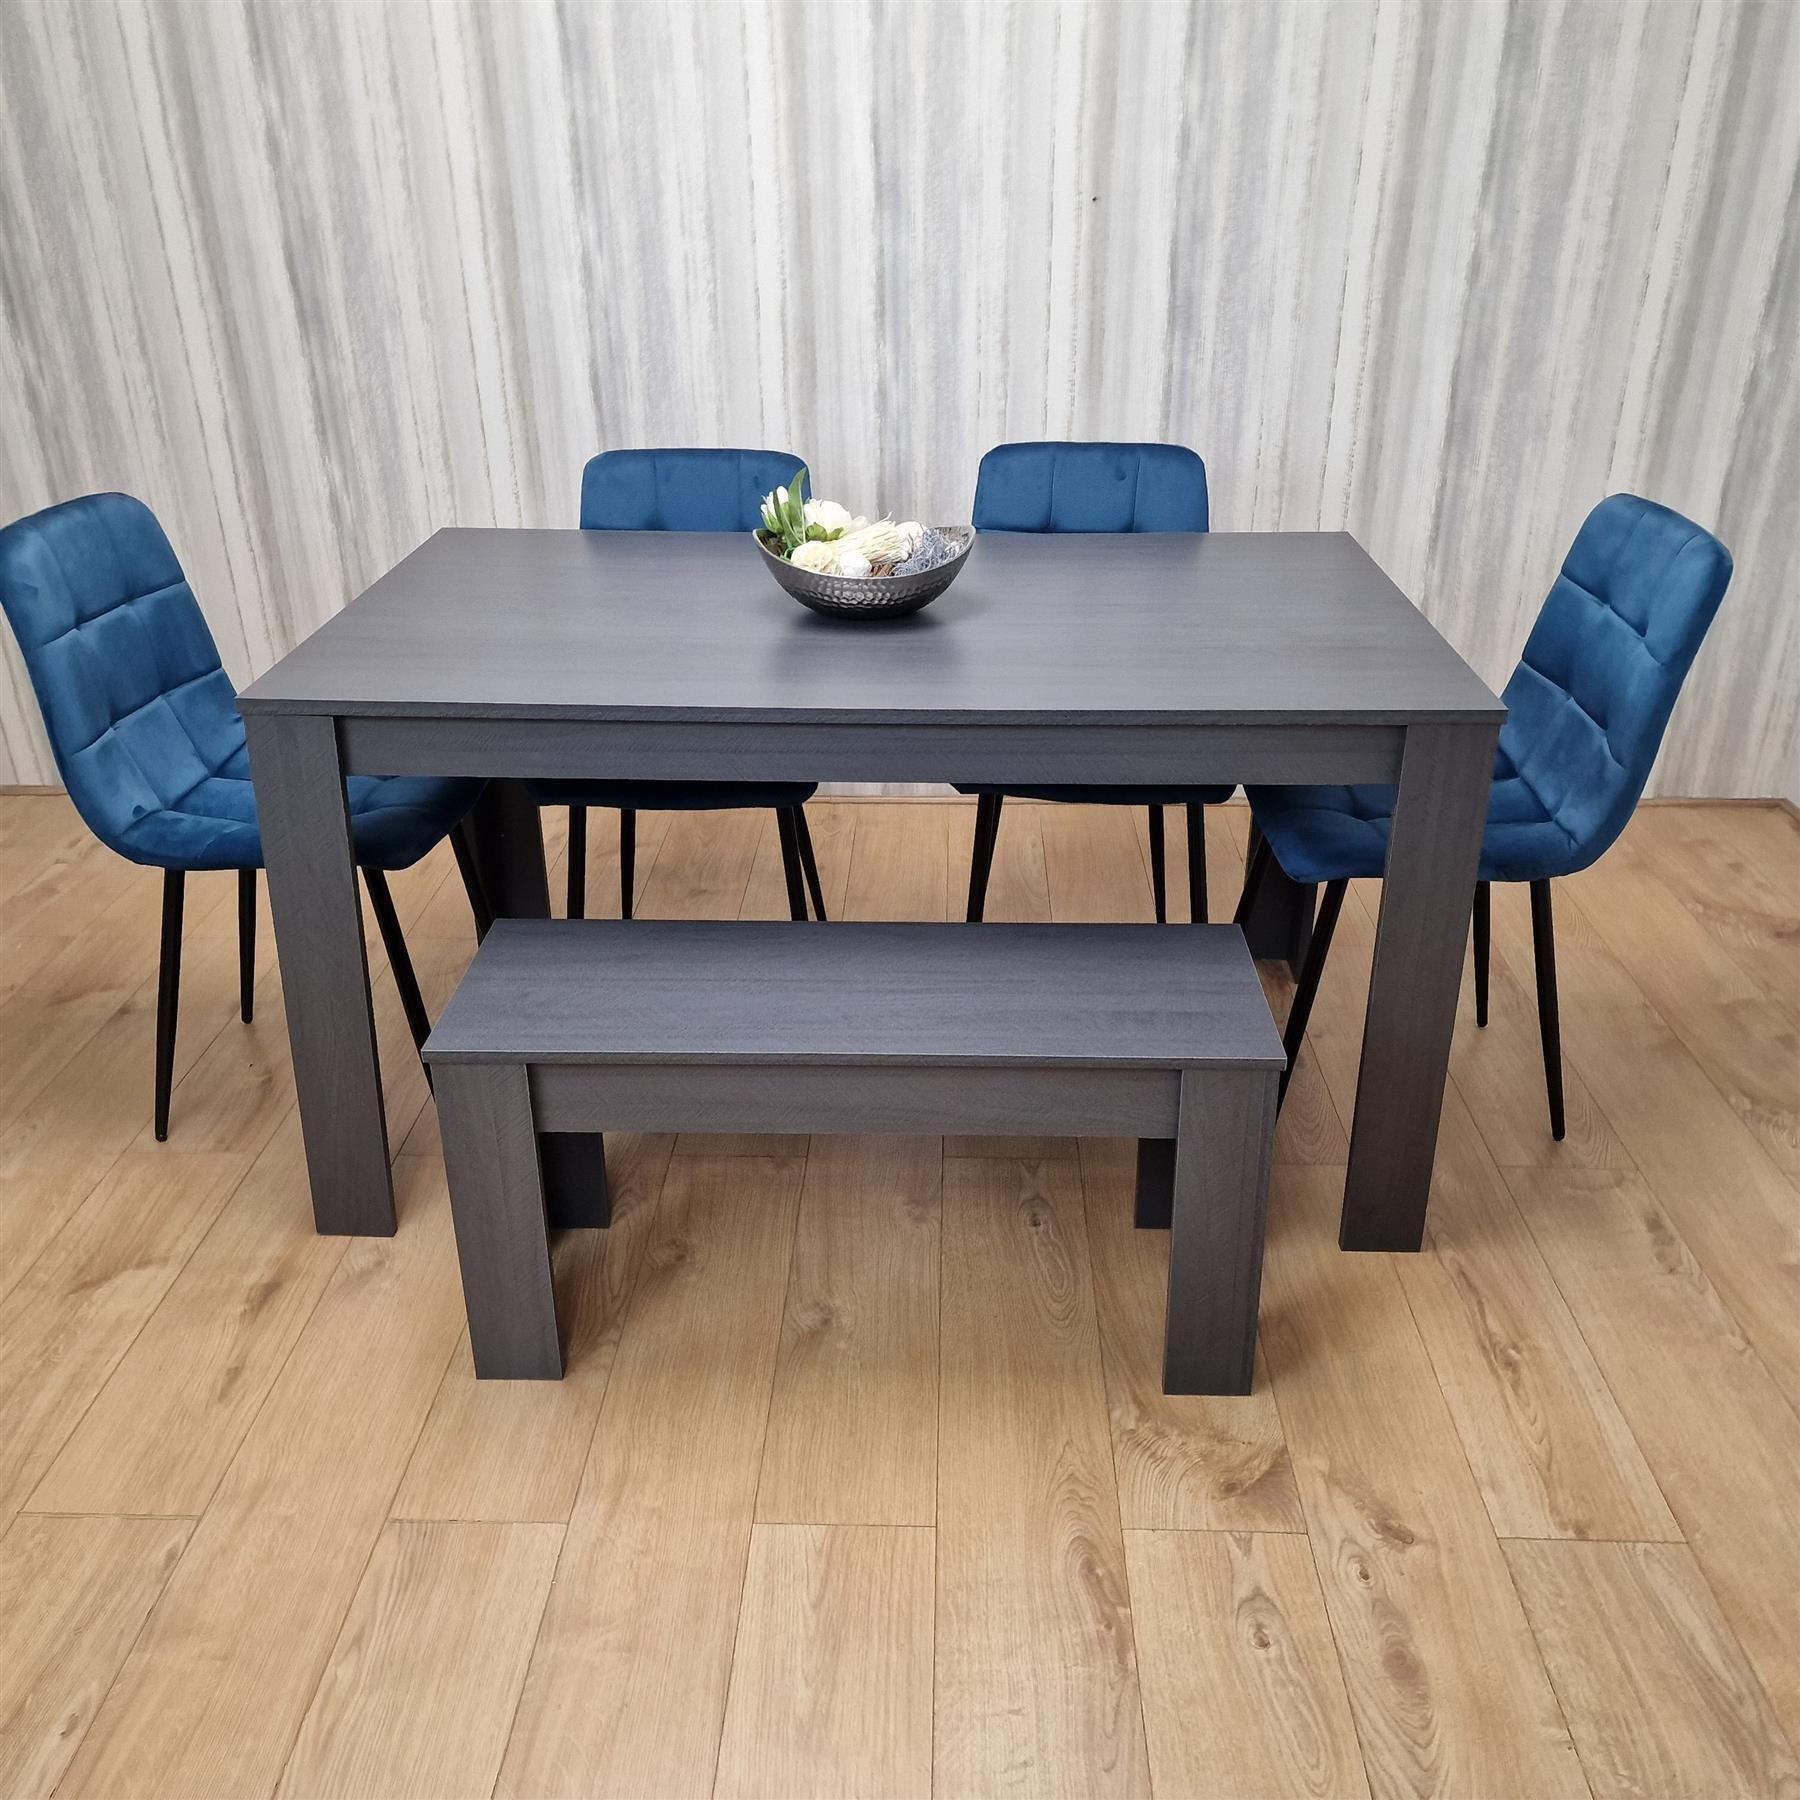 Wooden Dining Table Set with 4 Chairs and a Bench Dining Room and Kitchen table set of 4 - image 1